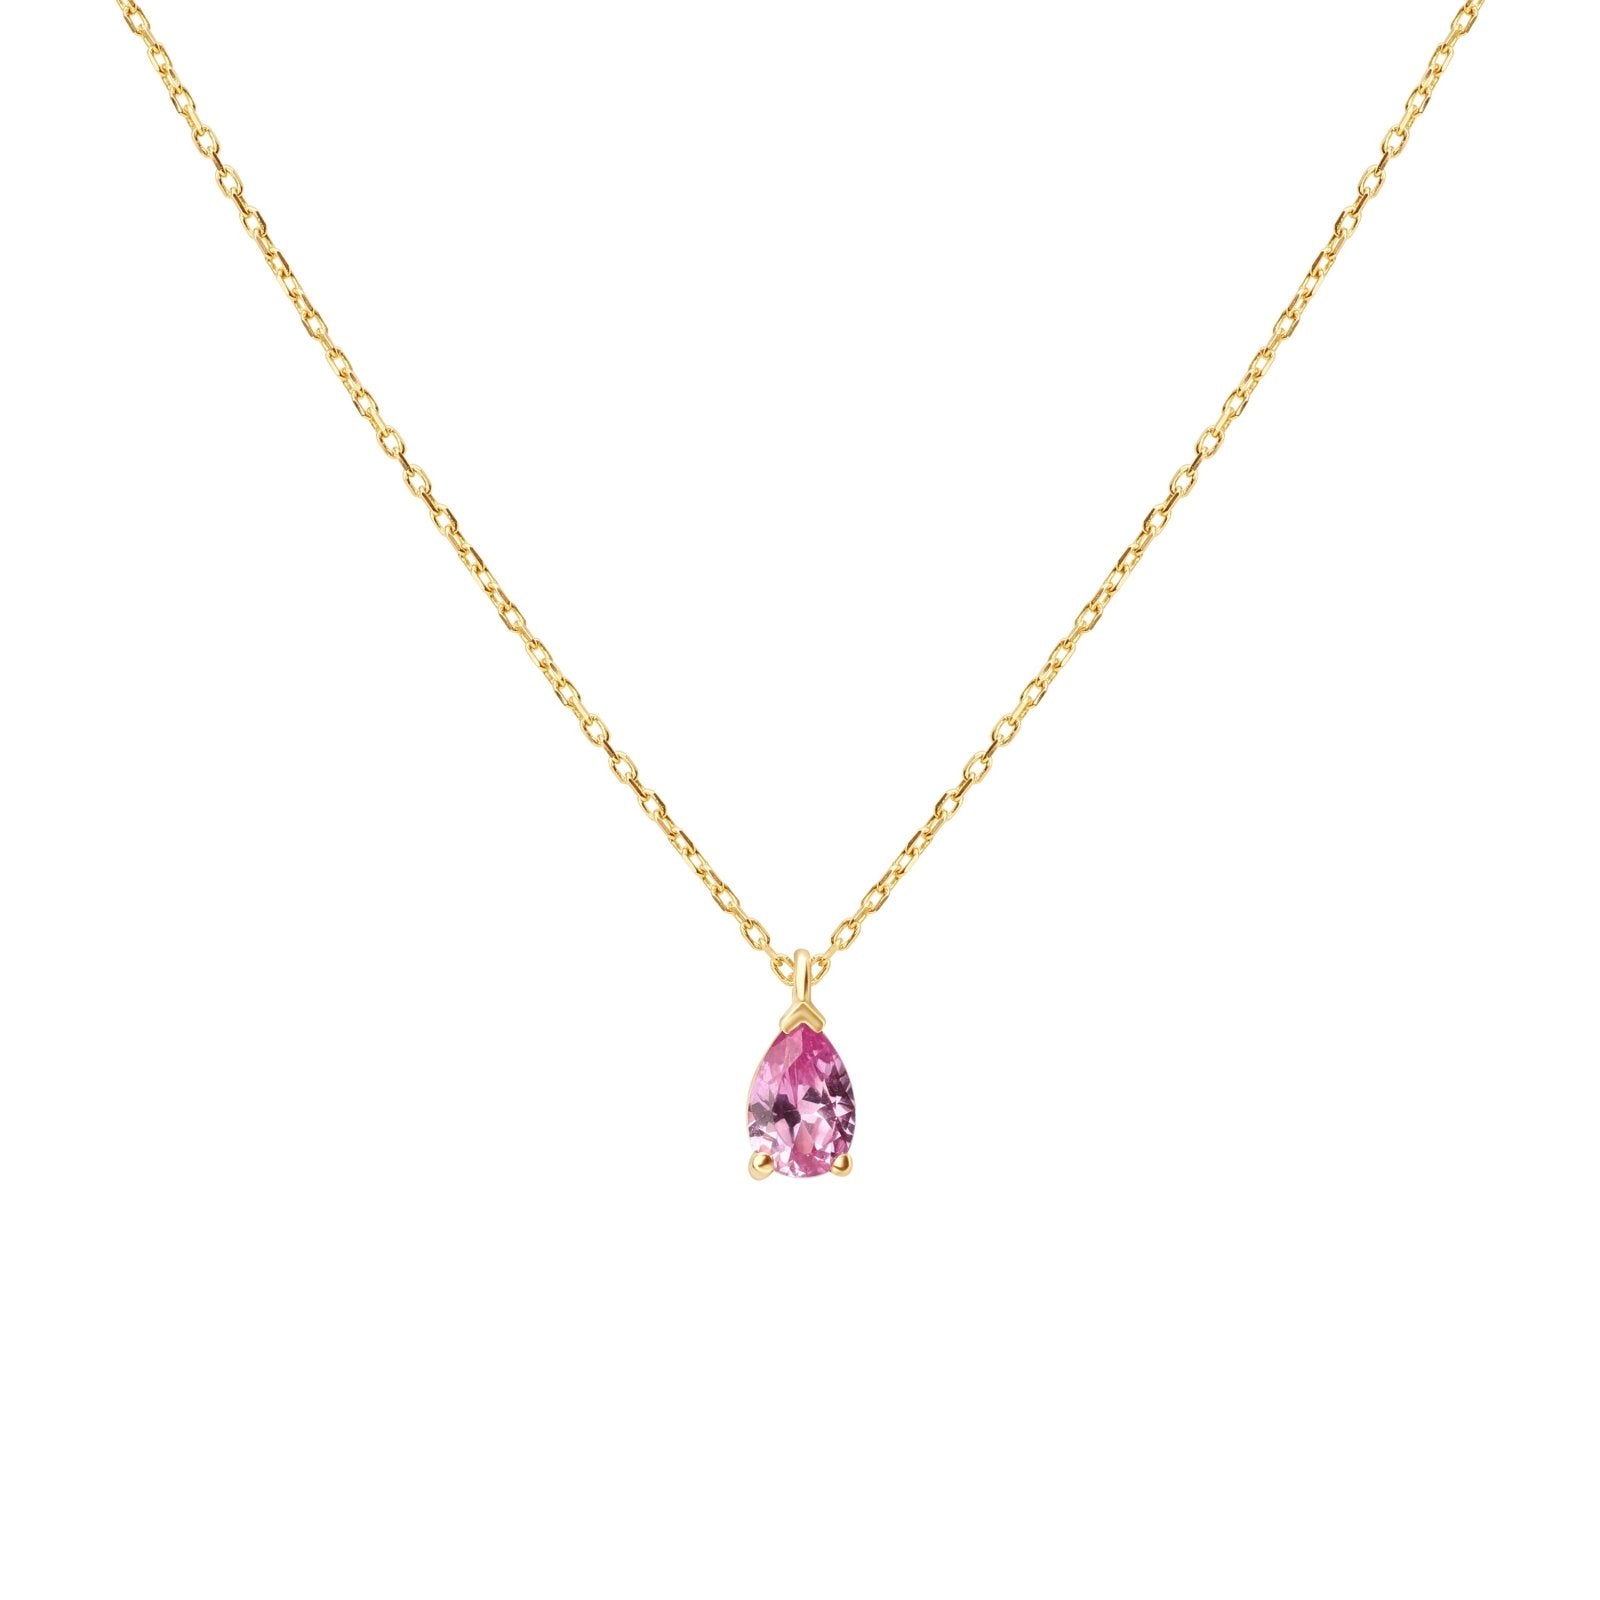 Pear Pink Topaz Gemstone Pendant Necklace in 14K Yellow Gold Necklaces Estella Collection #product_description# 17830 14k Birthstone Gemstone #tag4# #tag5# #tag6# #tag7# #tag8# #tag9# #tag10#